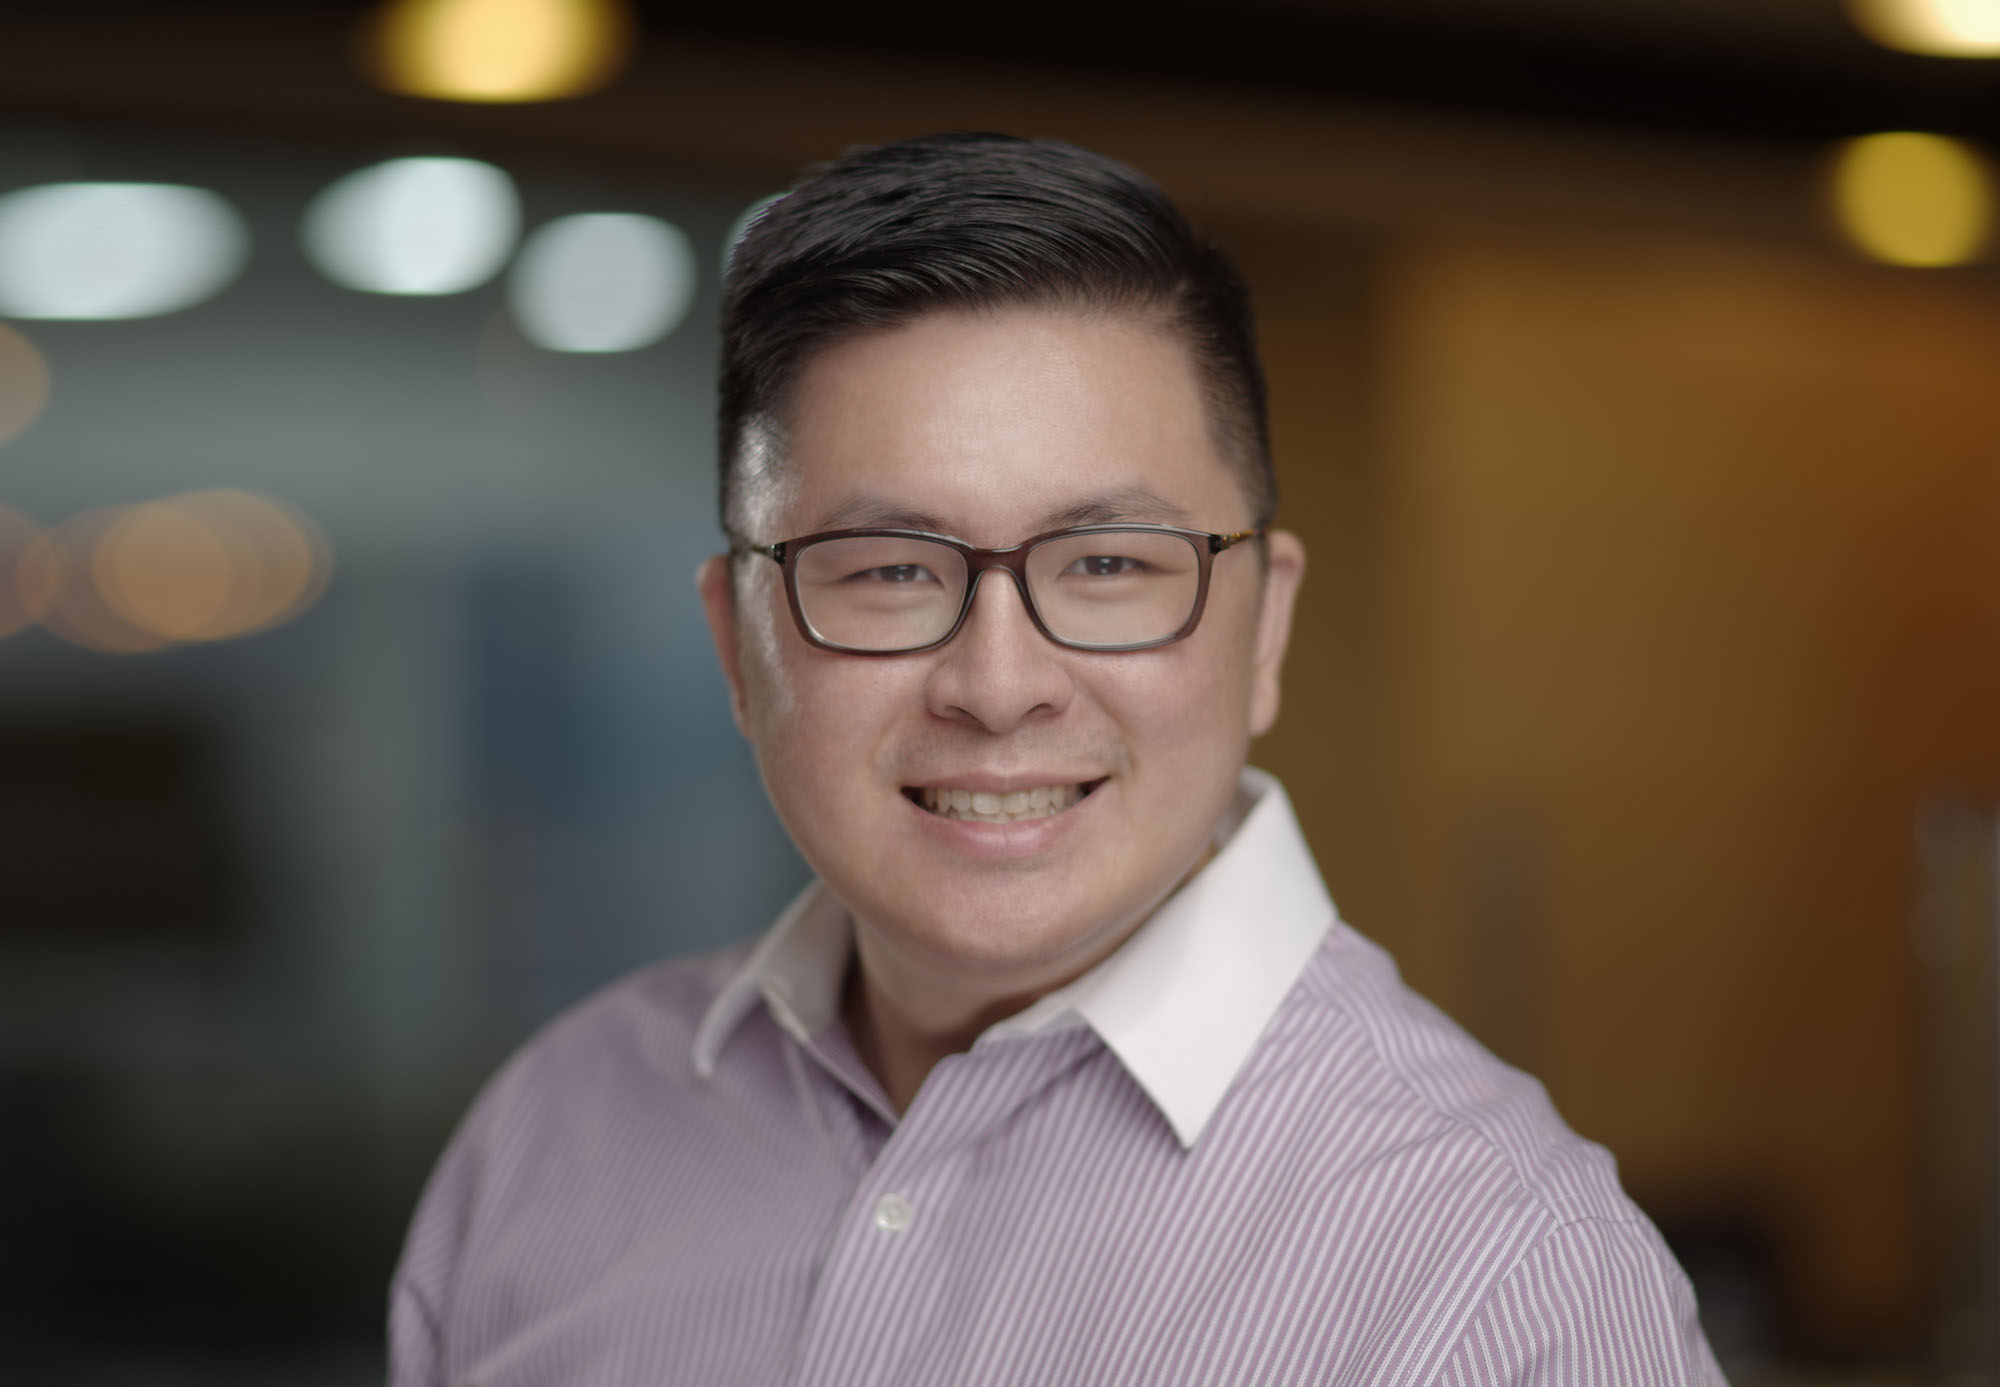 3 thoughts from Centauri Fund partner Kenneth Li about K-Growth’s investment